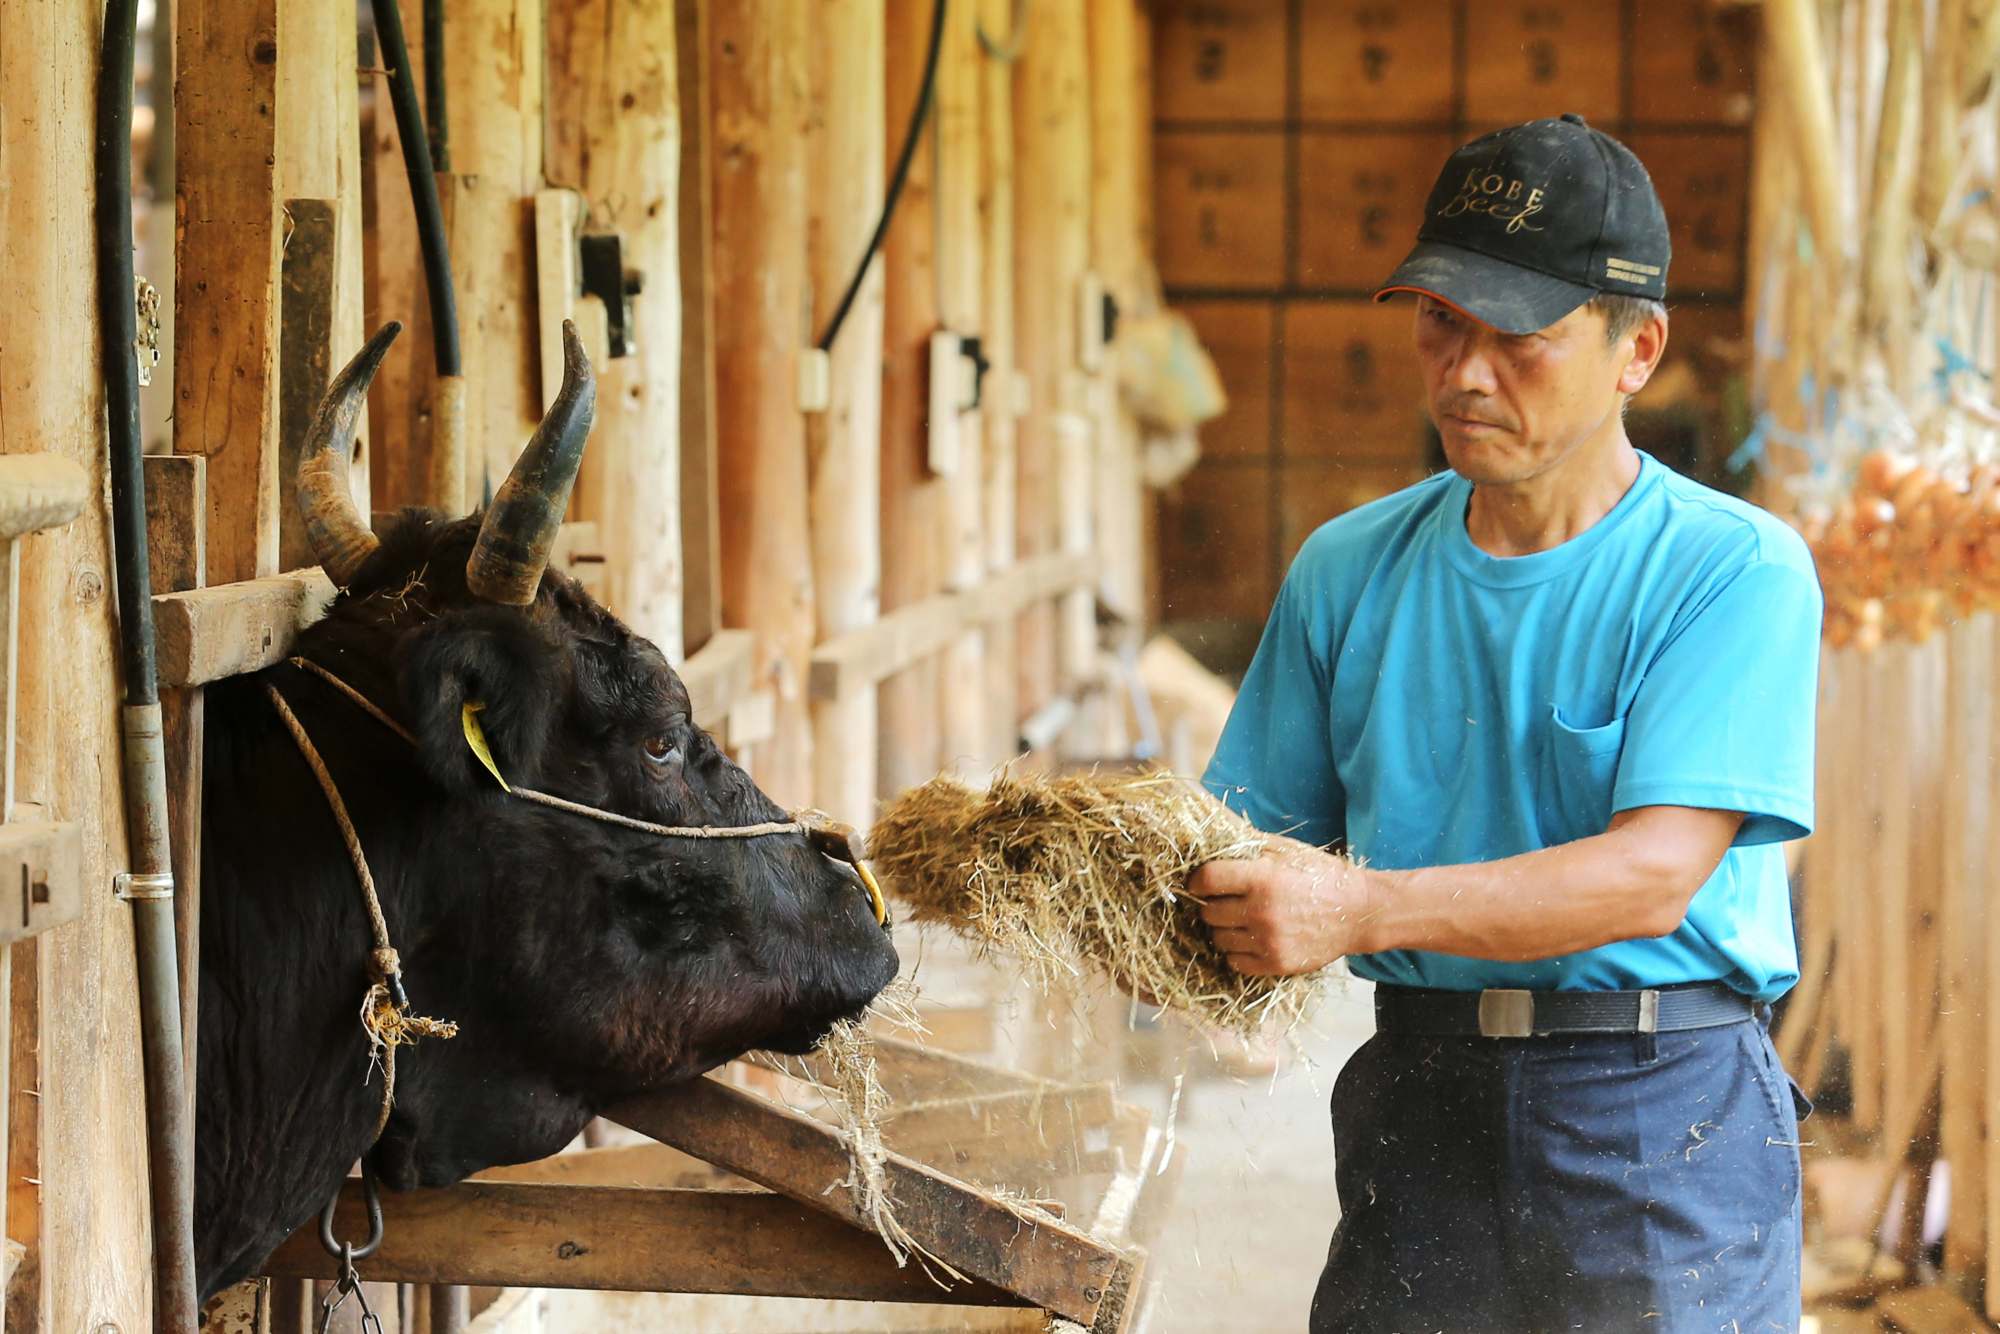 Farmer Minoru Terao feeds a beef cow at a farm in Yabu, Hyogo Prefecture, in August 2015. The government is in a hurry to ratify the Trans-Pacific Partnership trade deal, which will impact cattle farmers like Terao, as it seeks to take the lead in setting trade rules in the Asia-Pacific region. | BLOOMBERG